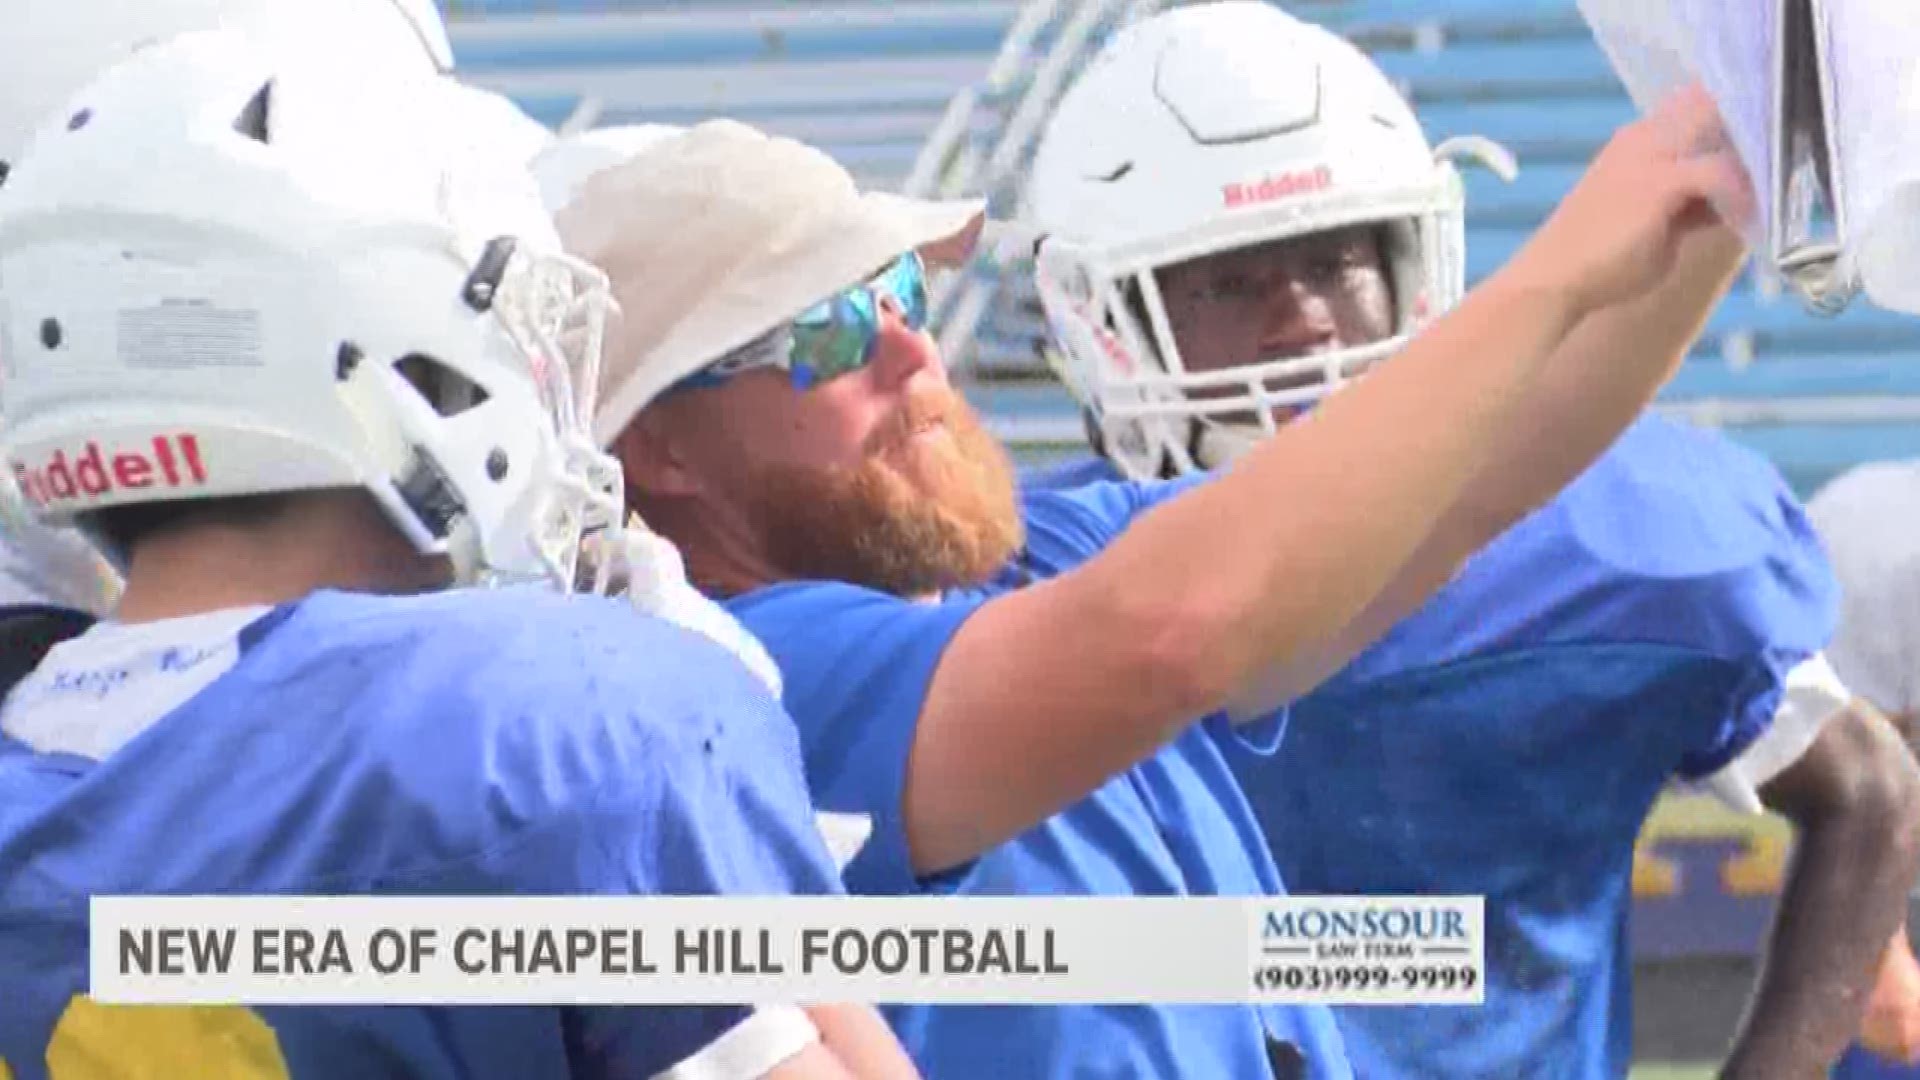 There hasn't been much to be excited ab out when it came to the Chapel Hill football program in the past few years. The Bulldogs haven't had a winning season since 2013, and have a combined 6-24 record over the past 3 years, but things are about to change. With the arrival of former Crosby Head Coach Jeff Riordan & the return of former Brook Hill standout and Rice University commit Khalan Griffin, Chapel Hill certainly has the firepower to make some noise this upcoming season.